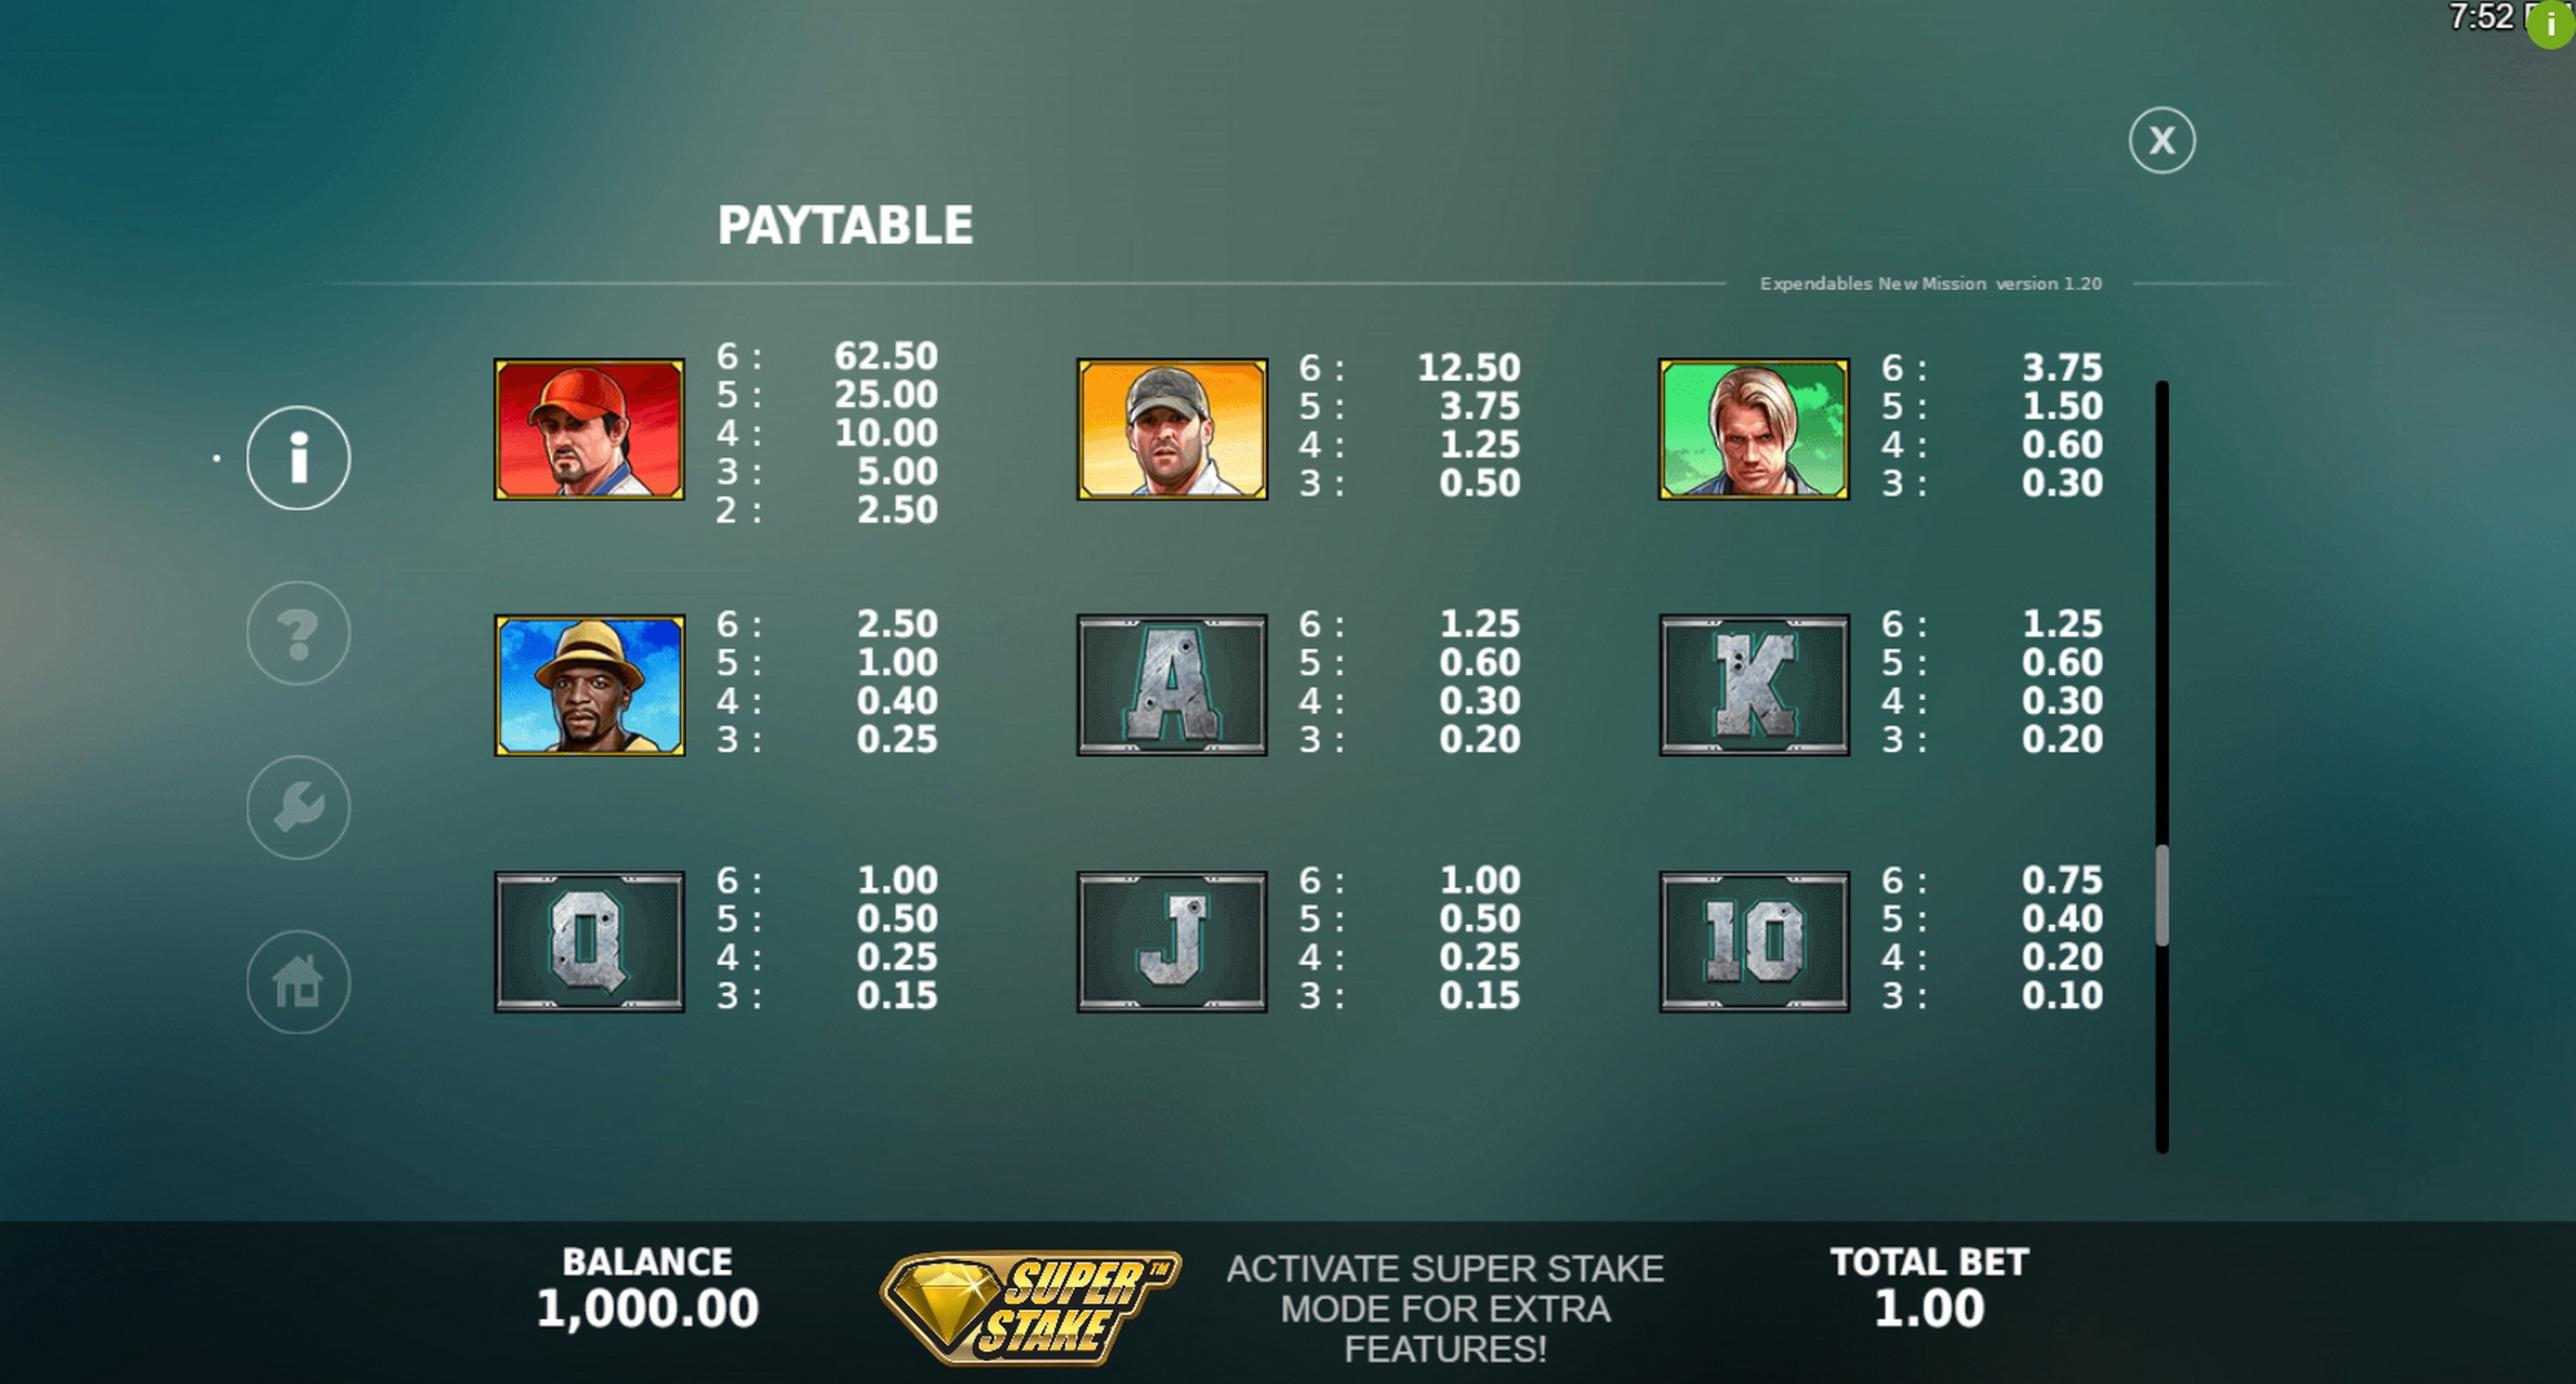 Info of The Expendables New Mission Megaways Slot Game by Stakelogic